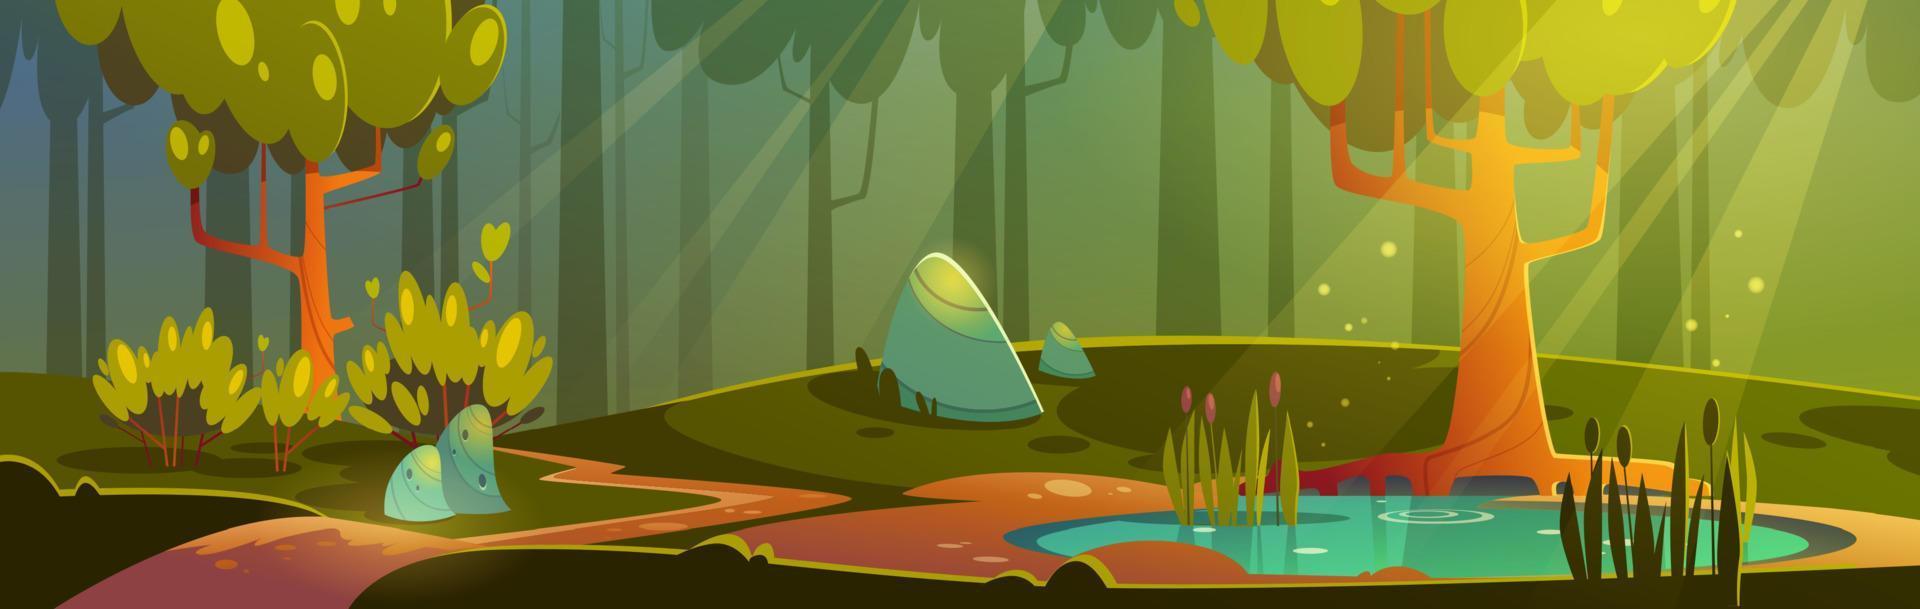 Cartoon forest background with pond or swamp. vector